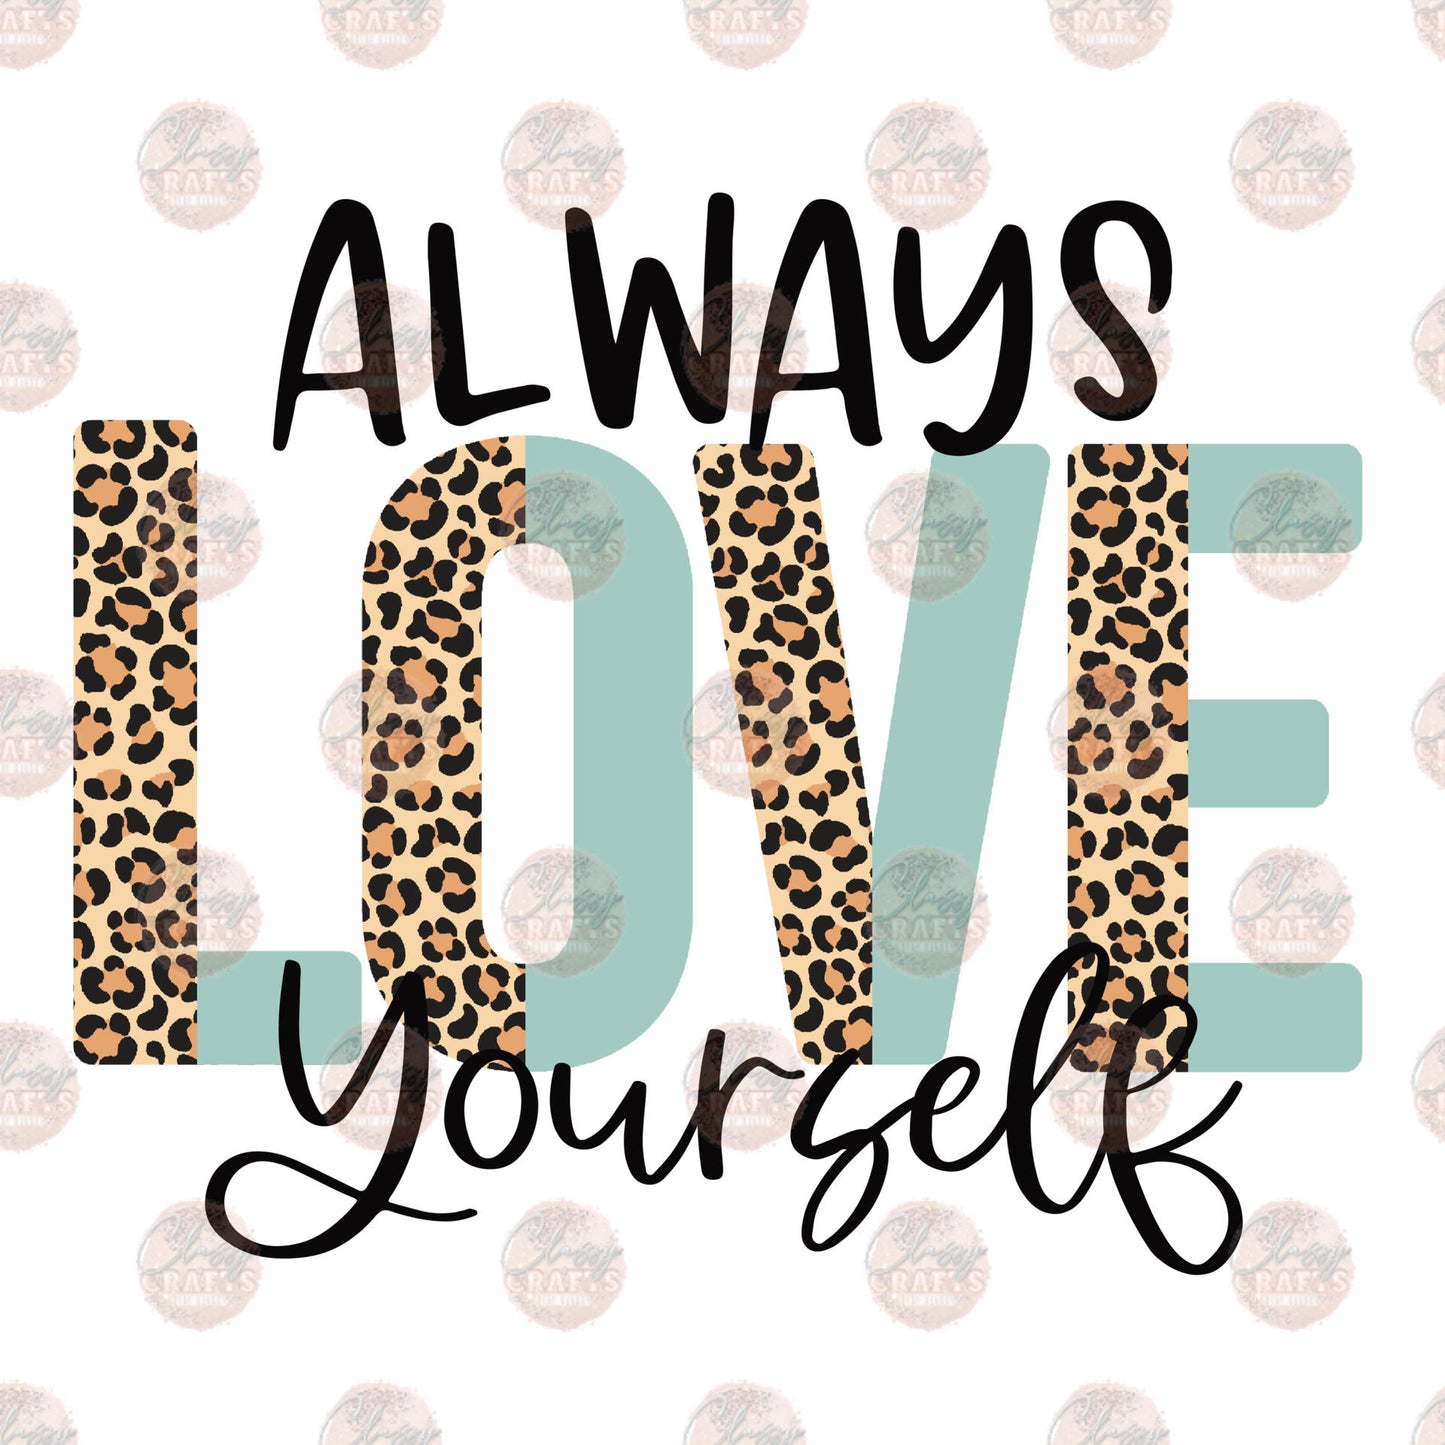 Always Love Yourself - Sublimation Transfer